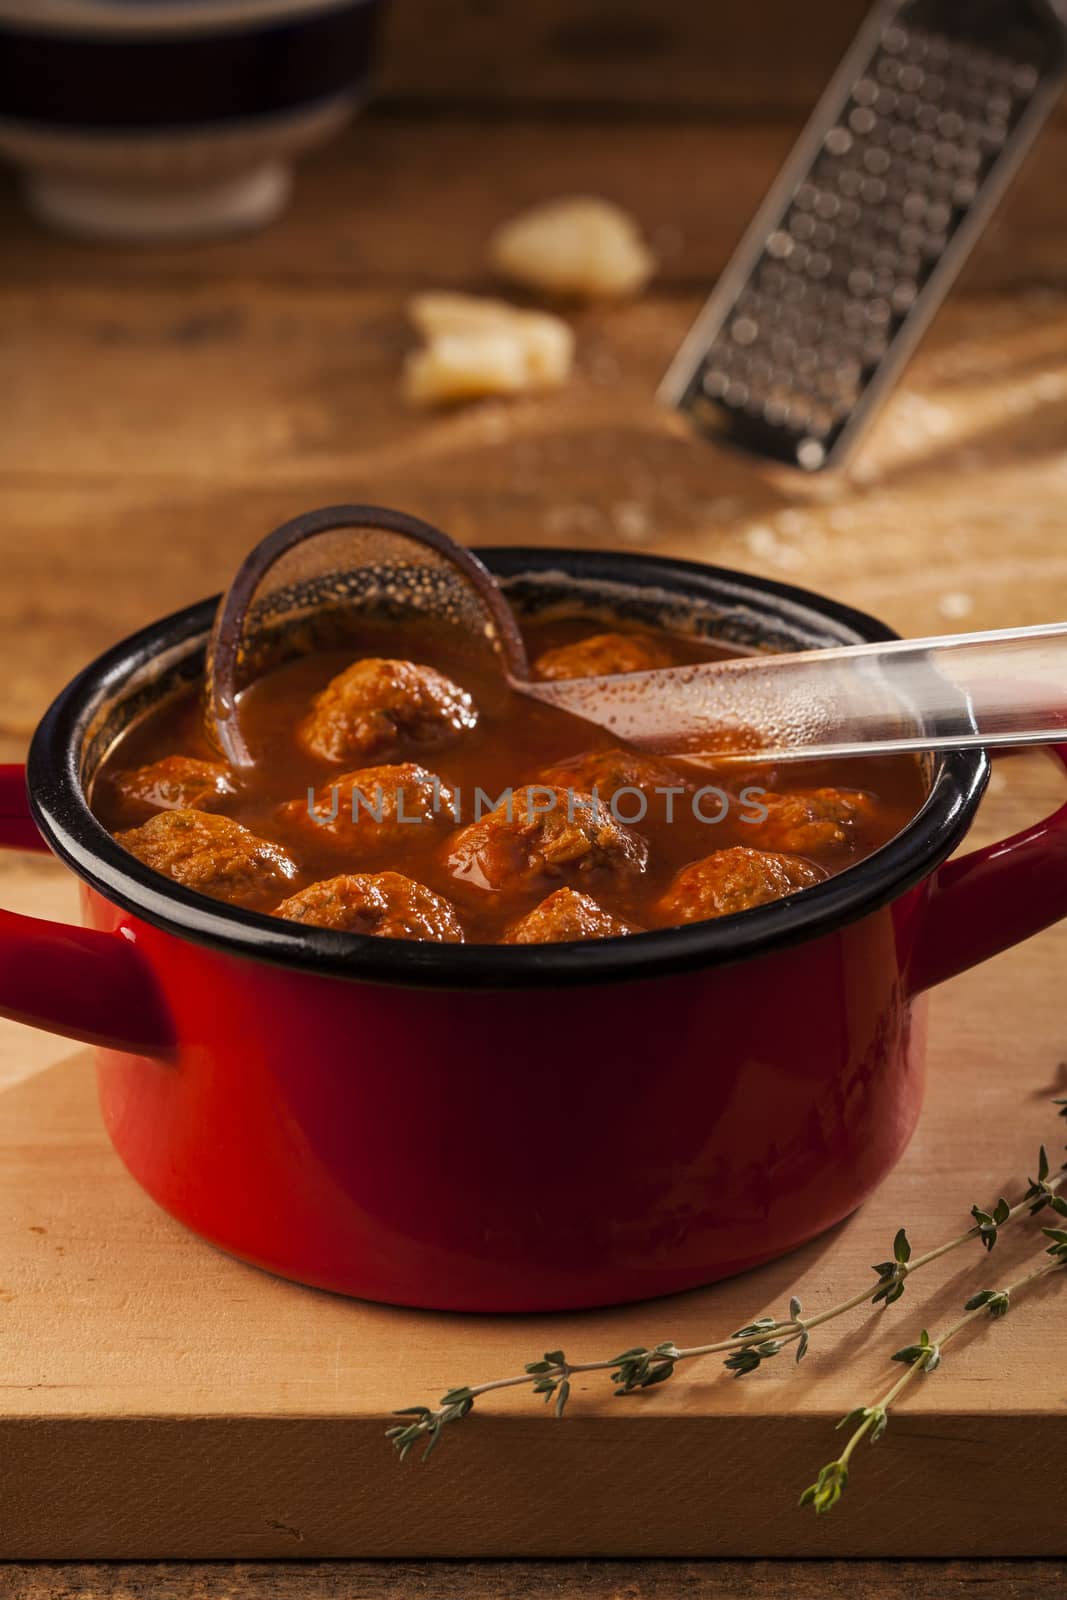 Meatballs in red pan with tomato sauce